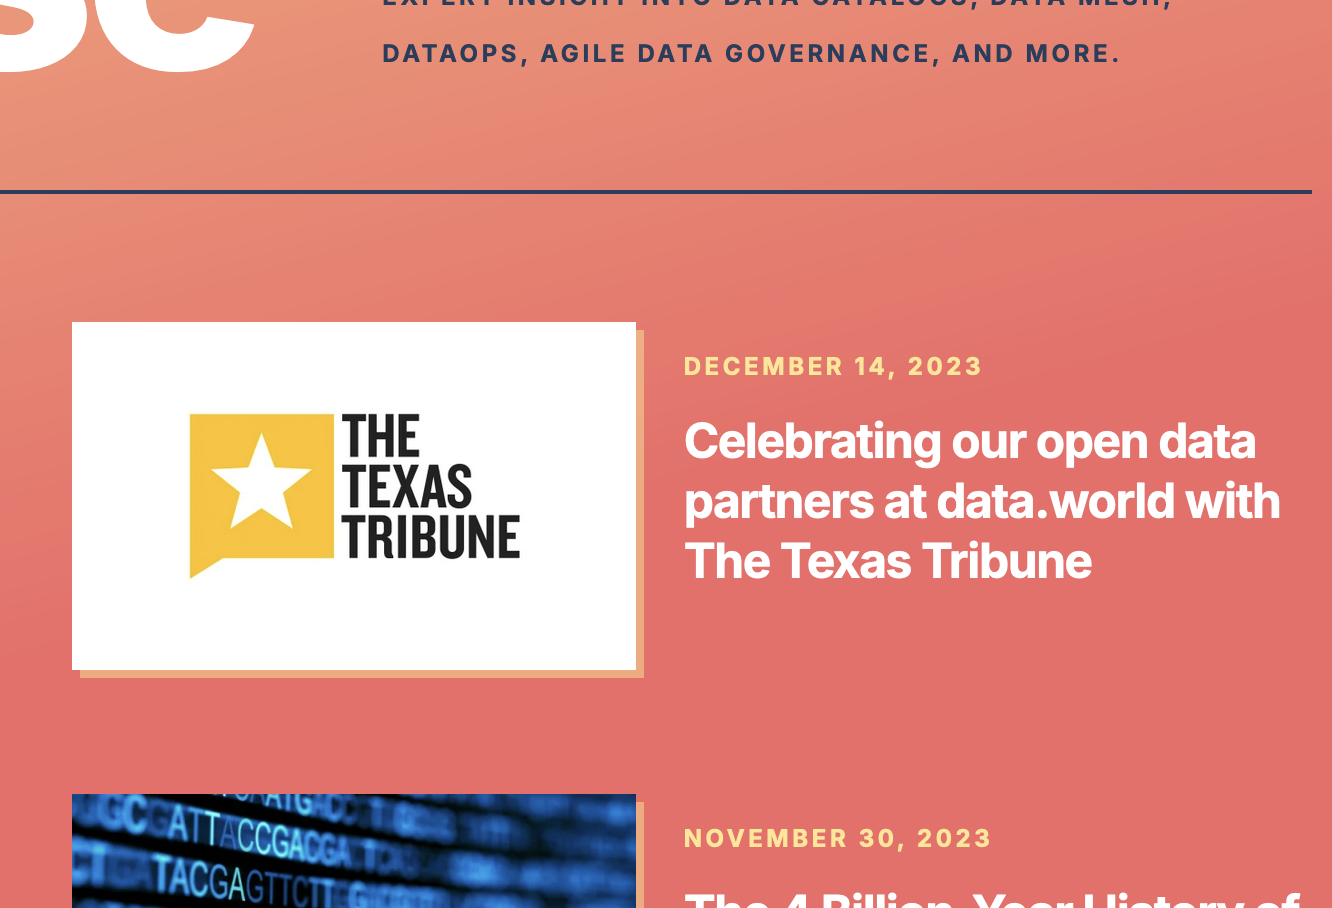 Celebrating our open data partners at data.world with The Texas Tribune